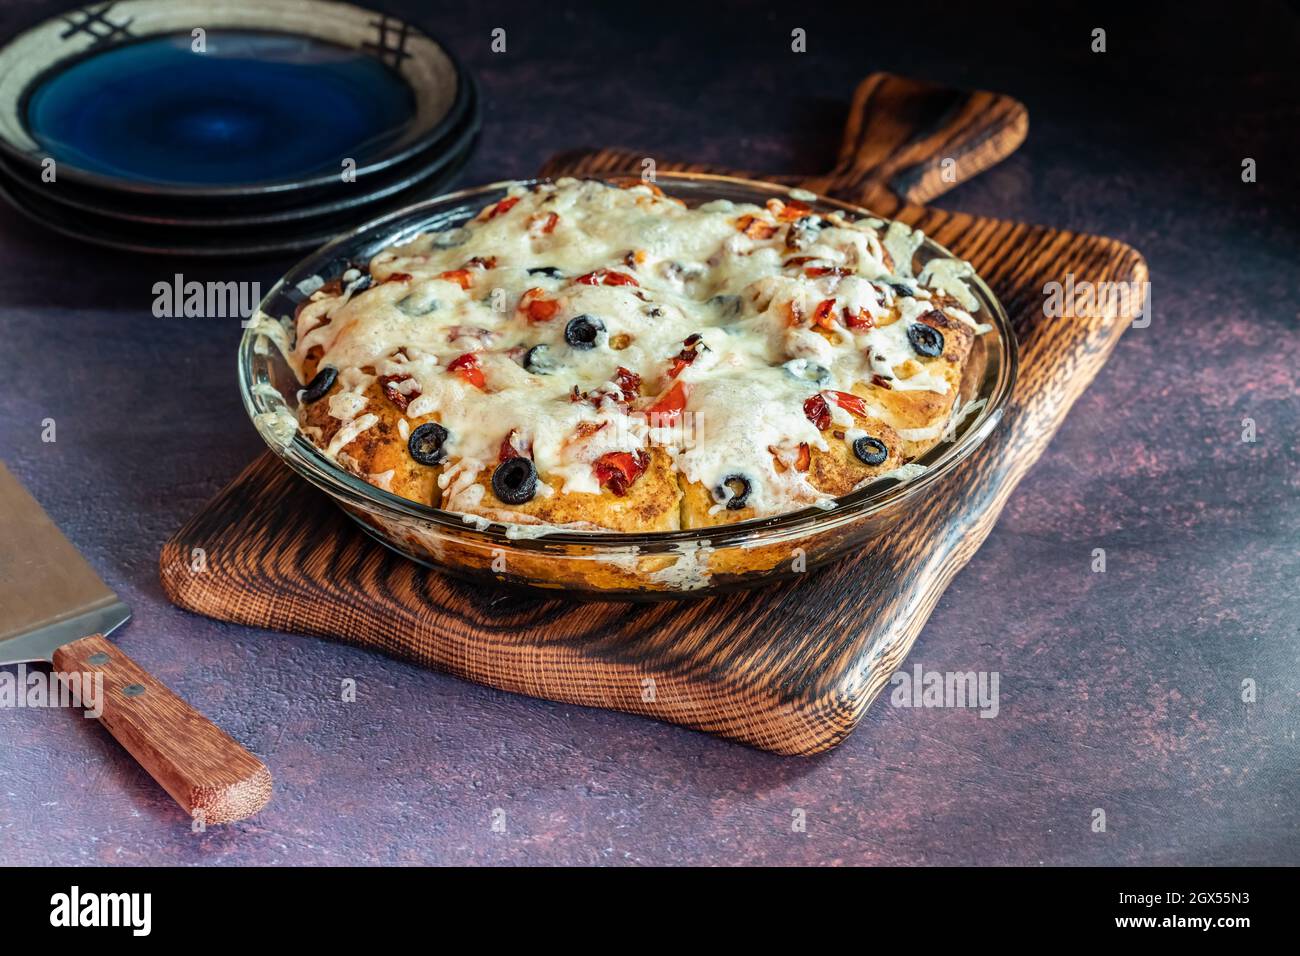 Freshly baked homemade pizza pull apart bread cooling on a wooden board. Stock Photo